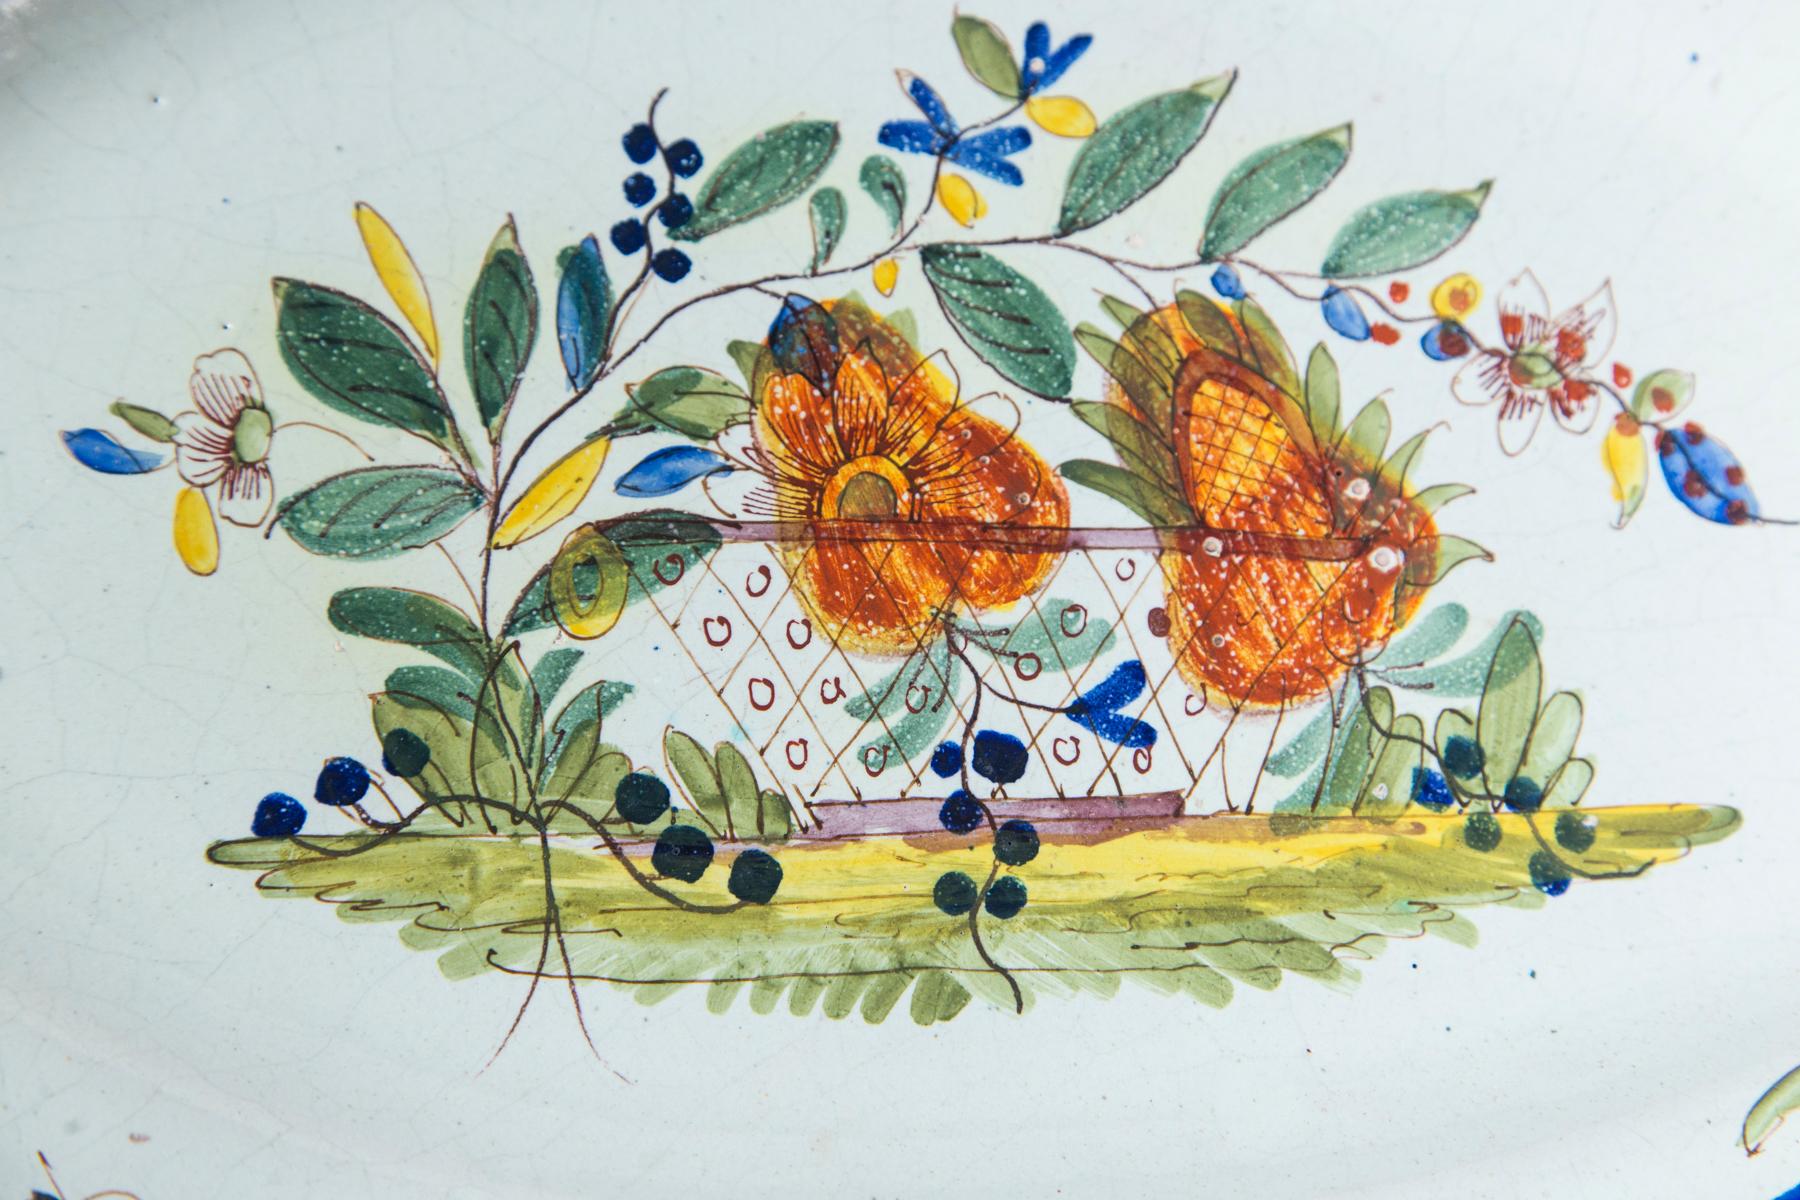 Ceramic Hand Painted French Faience Platter, Early 19th Century